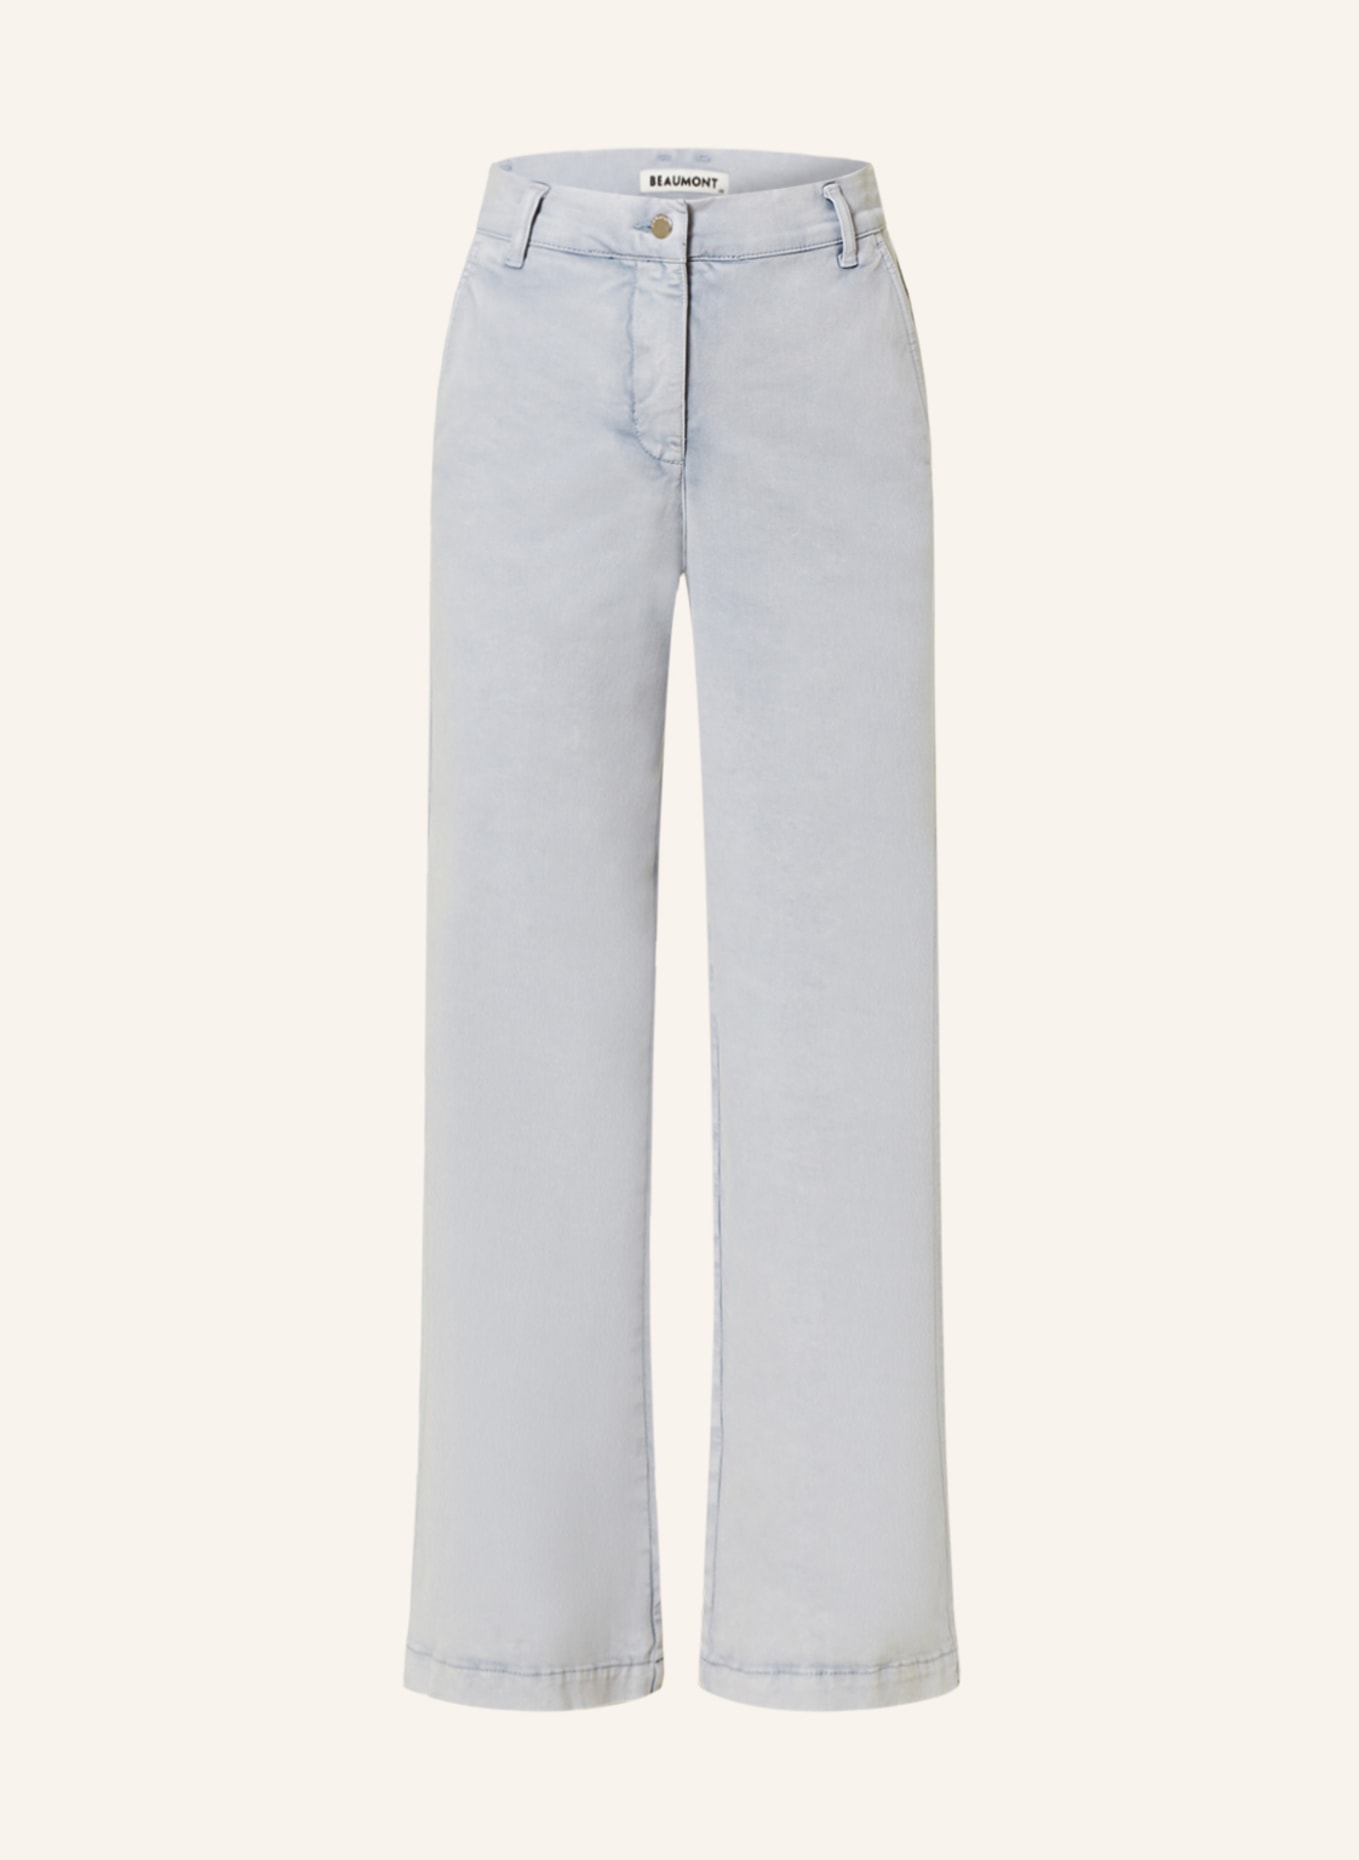 BEAUMONT Wide leg trousers ROSE in denim look, Color: LIGHT GRAY (Image 1)